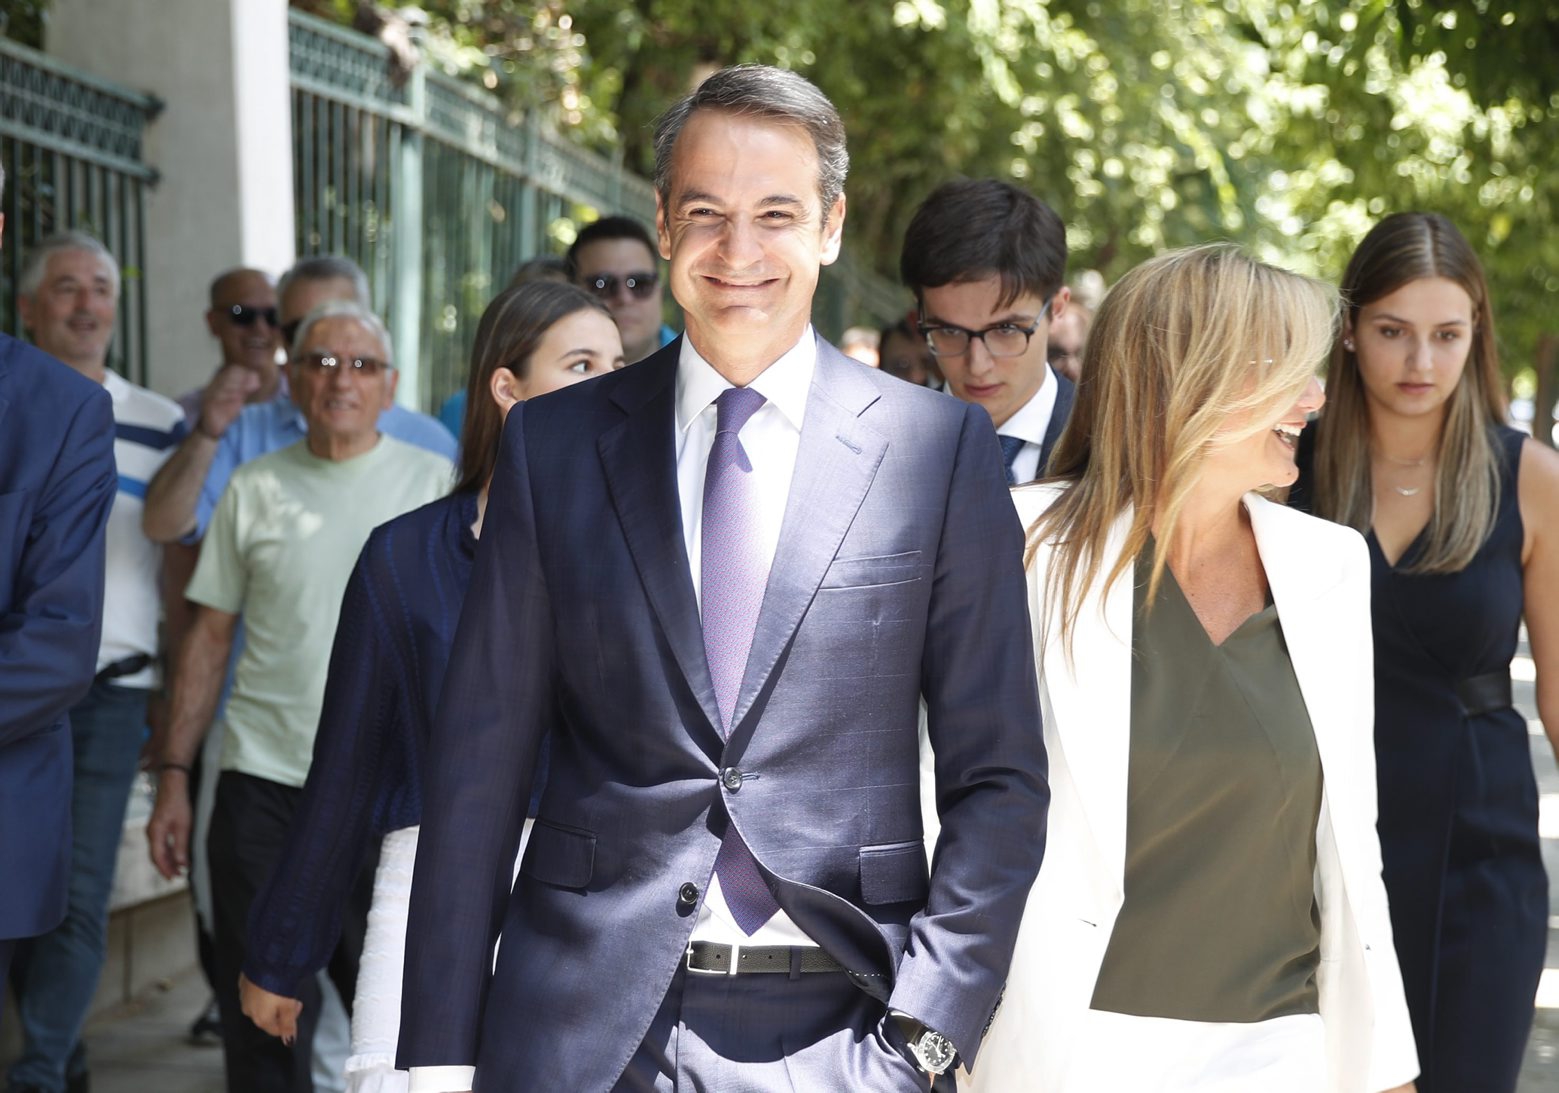 Greek opposition New Democracy conservative party leader Kyriakos Mitsotakis centre, walks with his wife Mareva, right in Athens, Monday, July 8, 2019. Mitsotakis was to be sworn in as Greece's new prime minister after a resounding win over left-wing Alexis Tsipras, who led the country through the tumultuous final years of its international bailouts. Mitsotakis' New Democracy party won 39.8% of the vote, giving him 158 seats in the 300-member parliament, a comfortable governing majority. (AP Photo/Thanassis Stavrakis)
Kyriakos Mitsotakis Greece Election